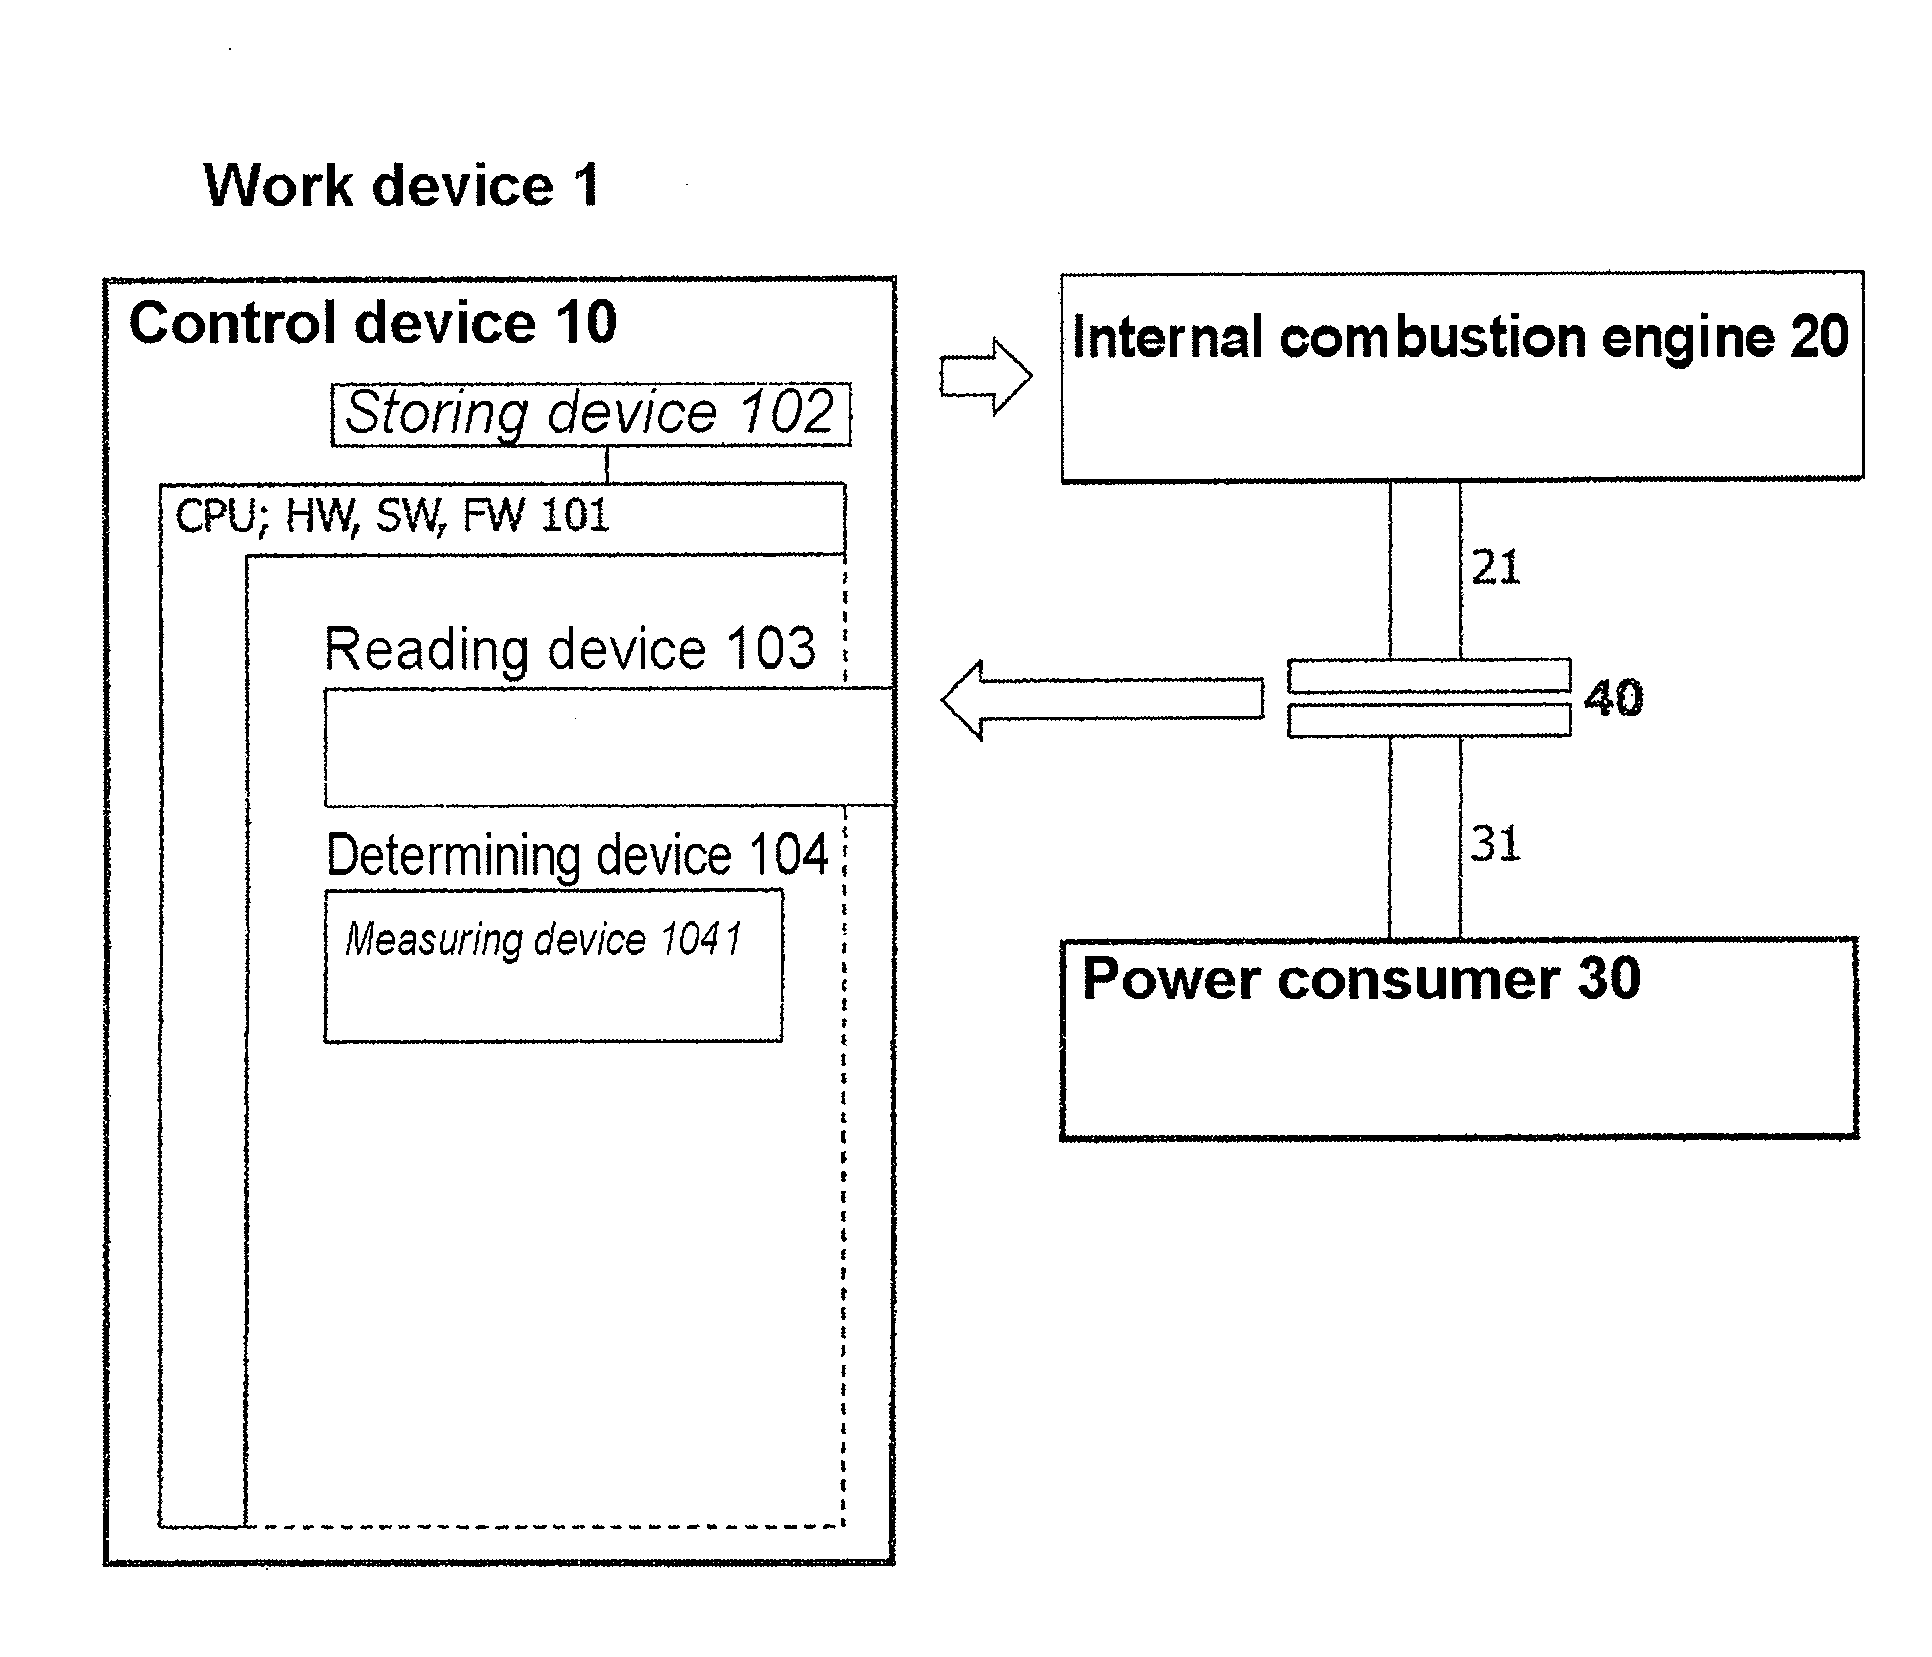 Method and device for controlling the operation of an internal combustion engine of a portable work device